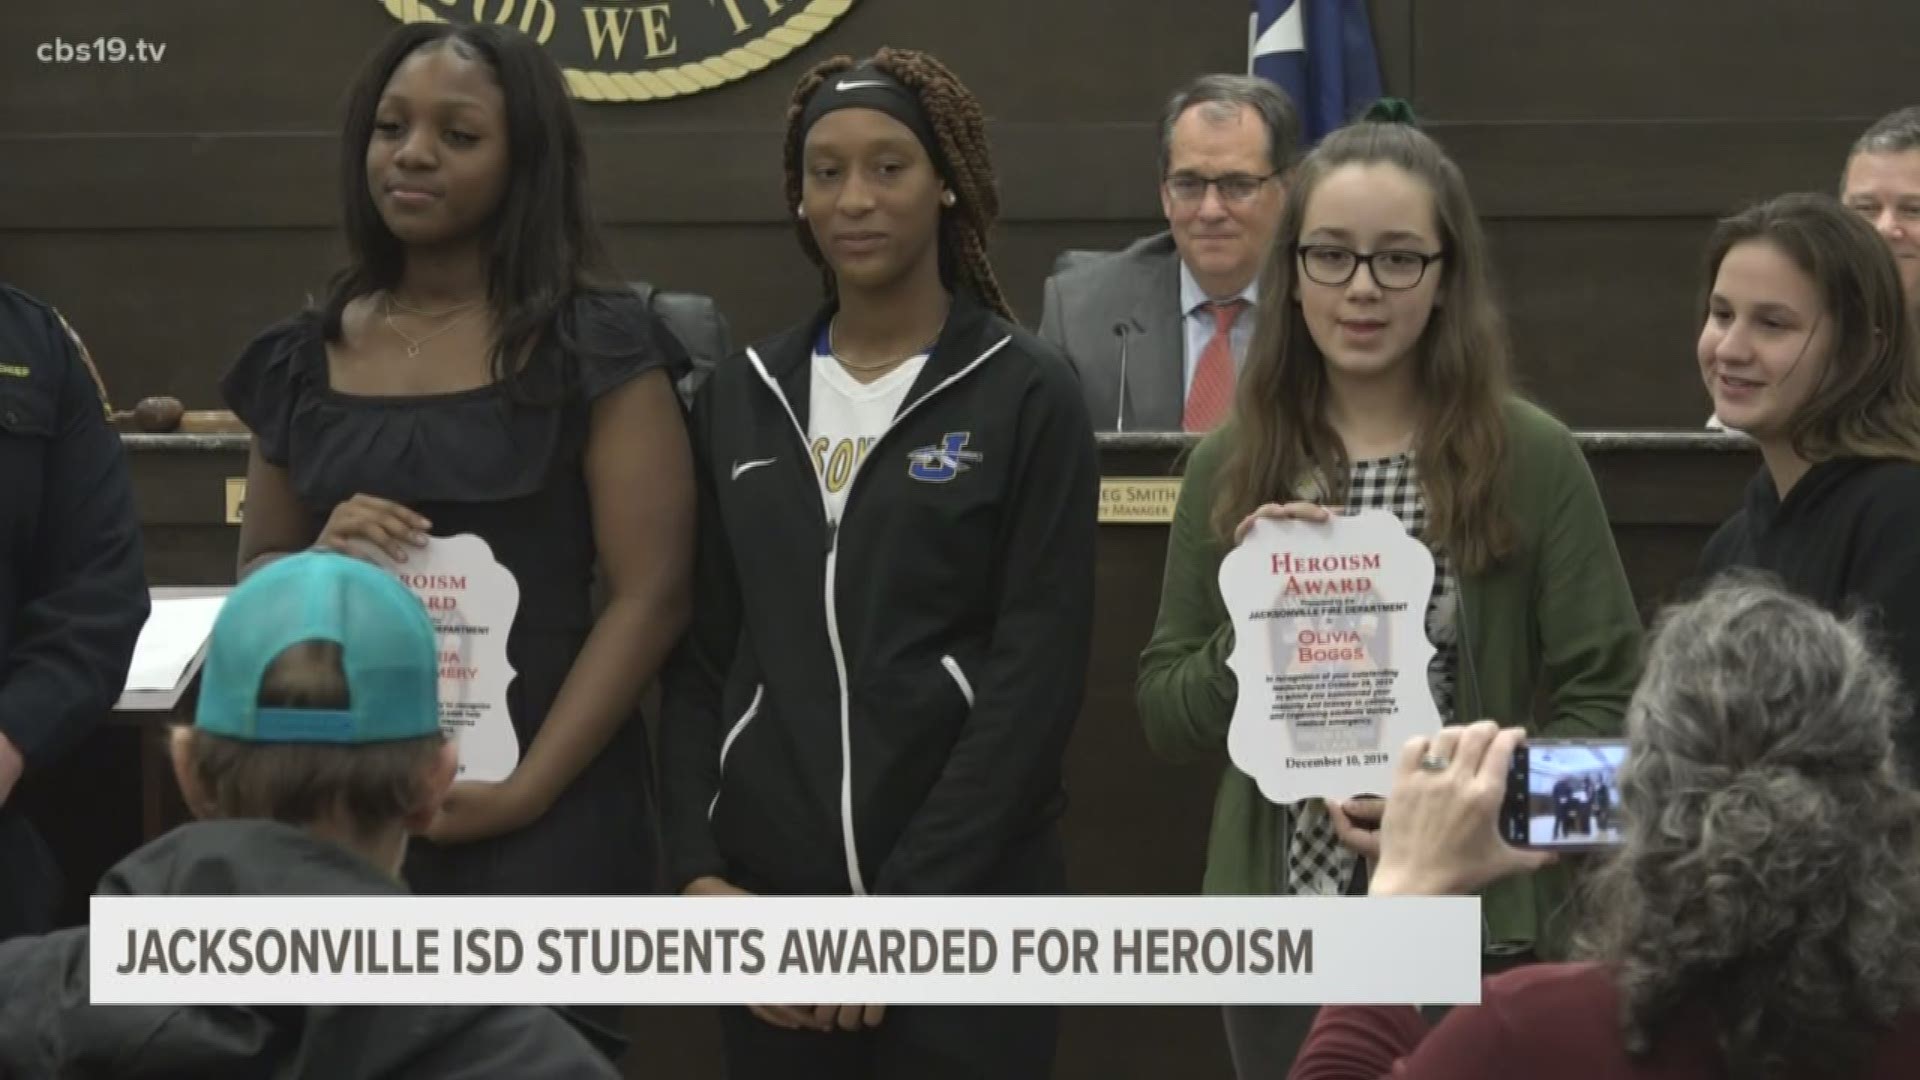 Two Jacksonville ISD students honored with Heroism Award